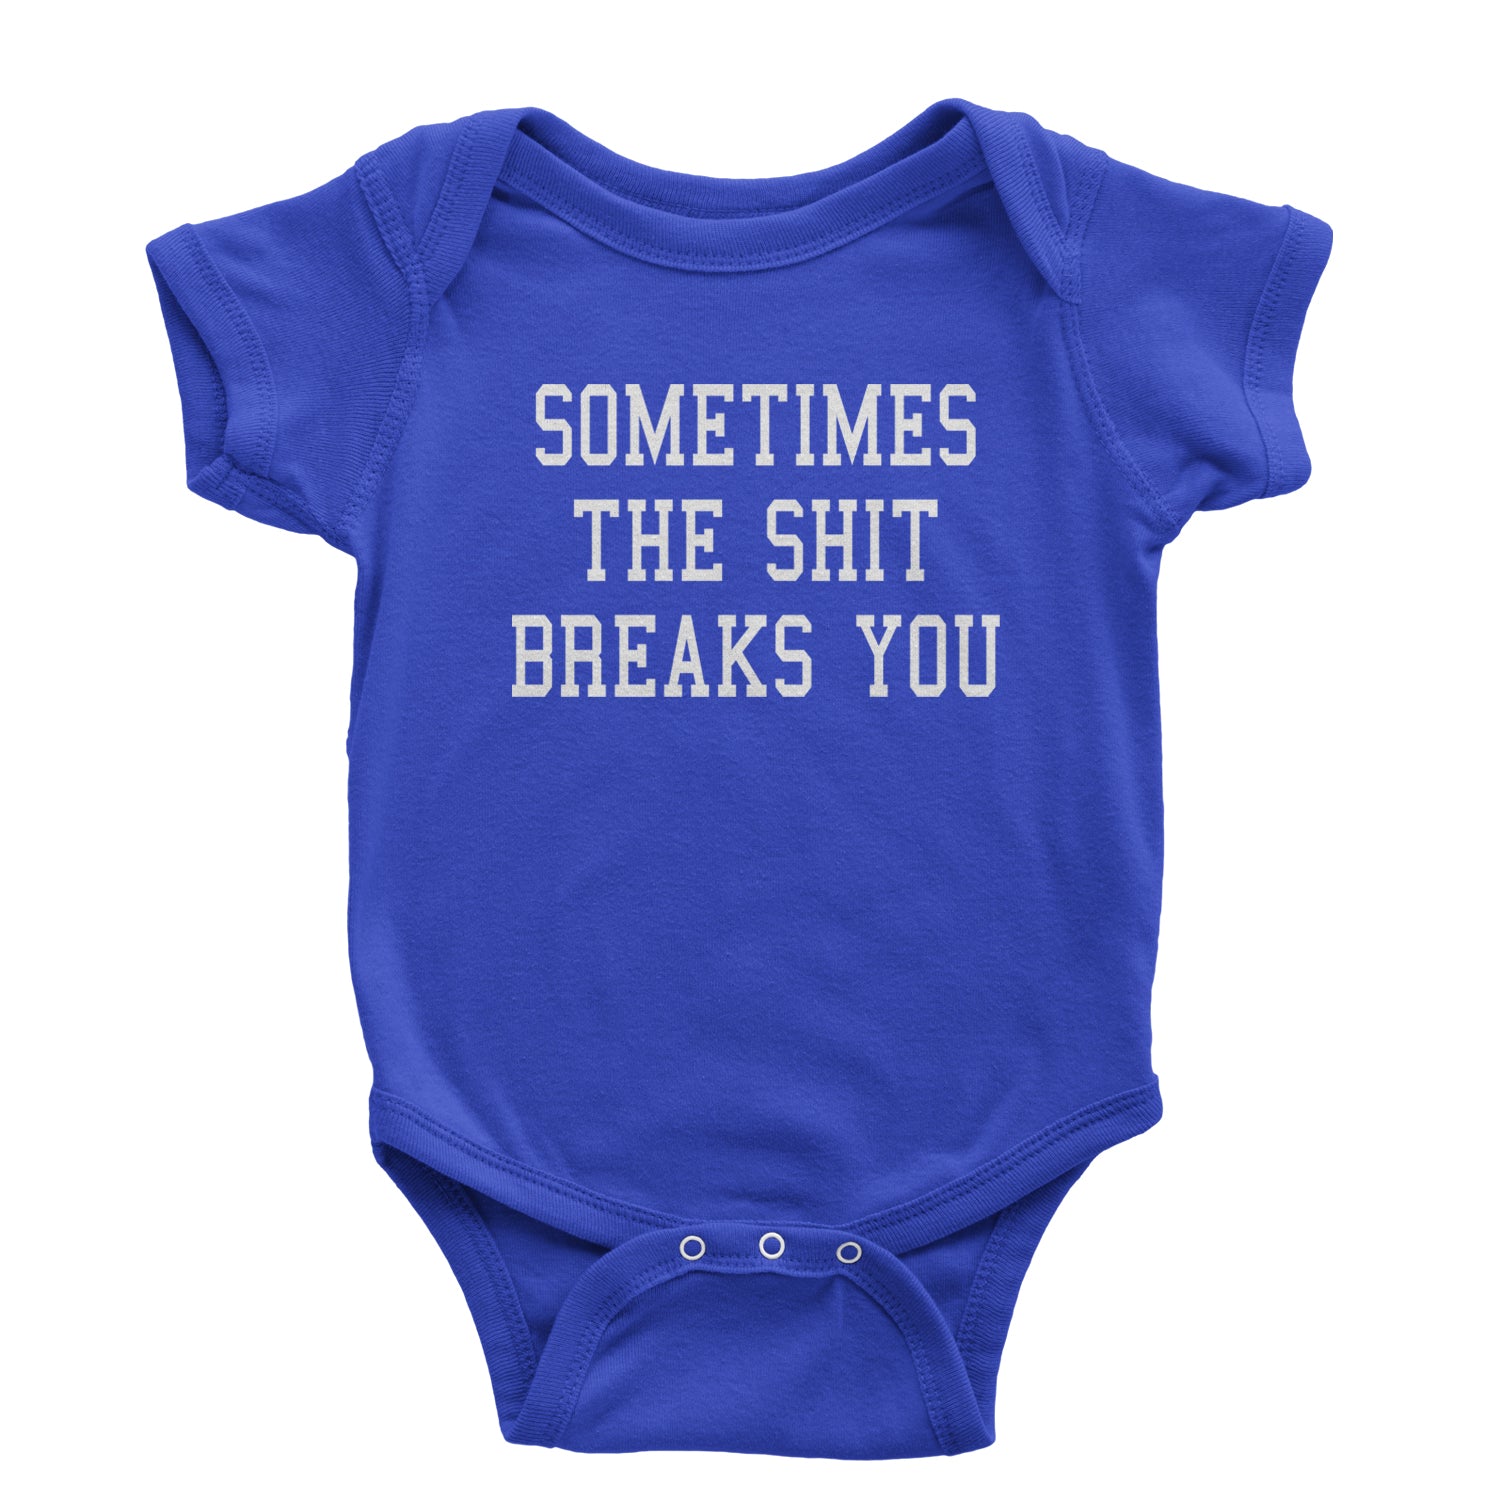 Sometimes The Sh-t Breaks You Infant One-Piece Romper Bodysuit and Toddler T-shirt china, chinese, funny, in, man, meme, observed, shanghai, shirt by Expression Tees